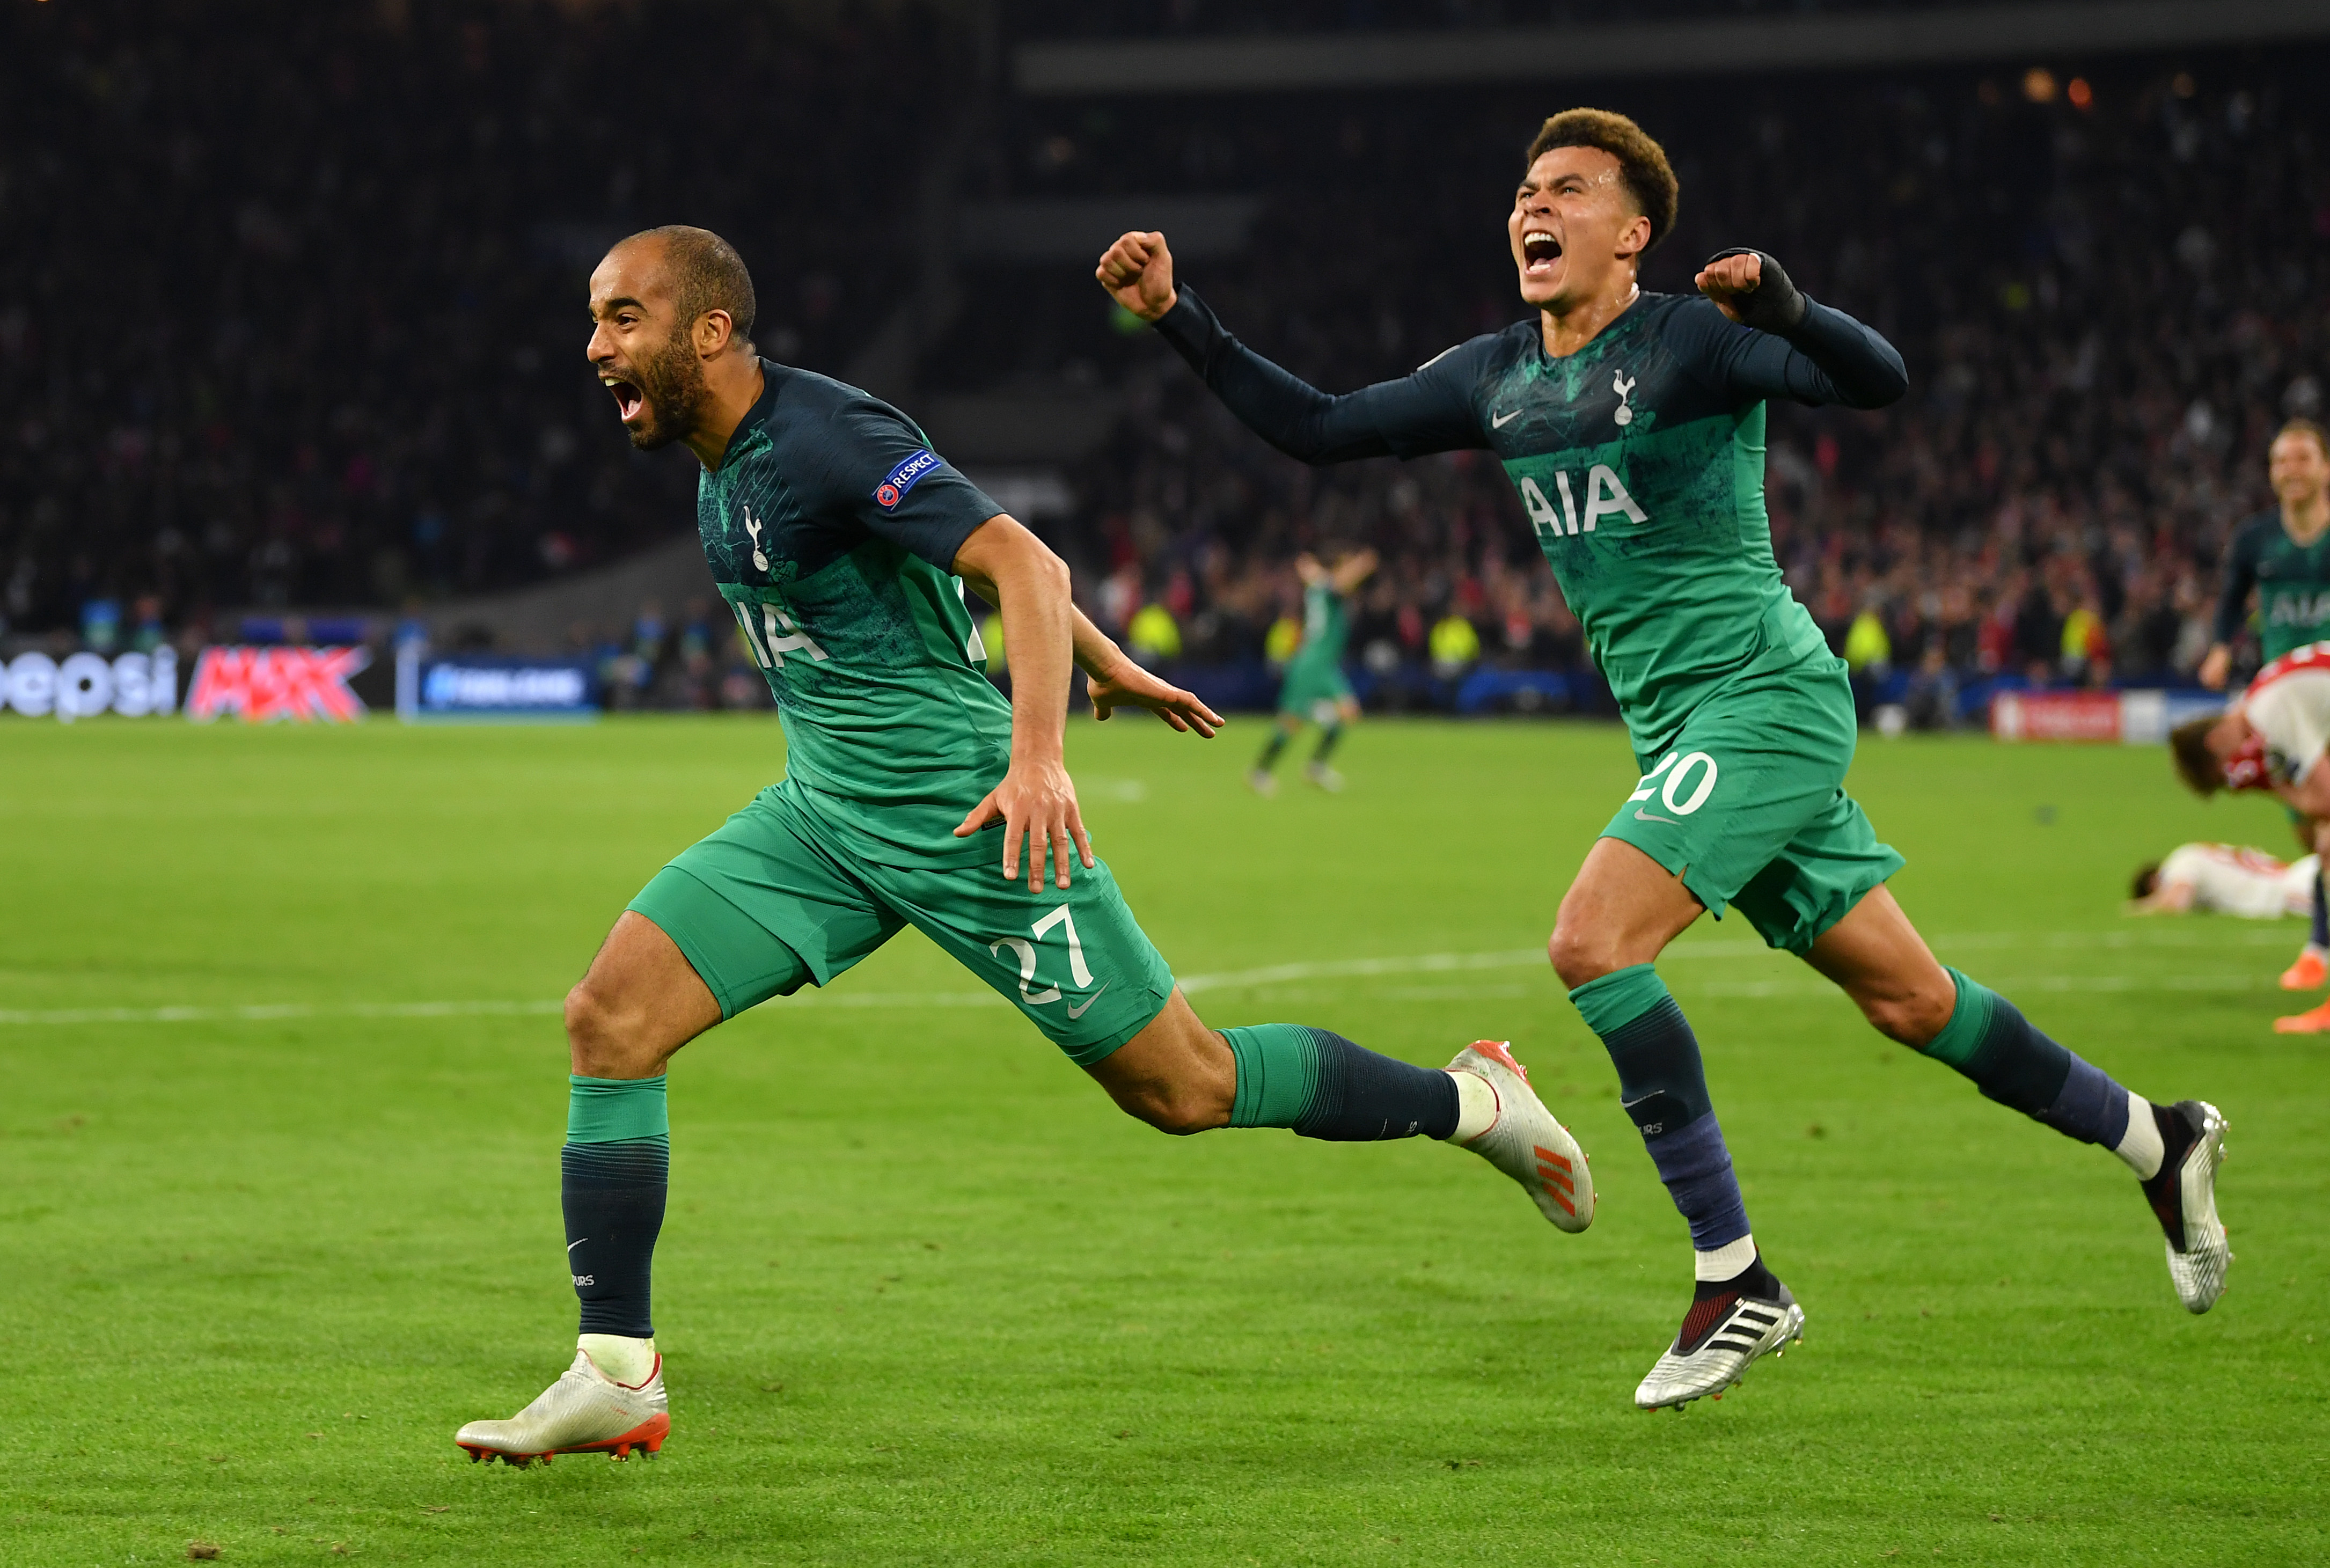 Tottenham pair Lucas Moura and Dele Alli celebrate after the Brazilian's dramatic tie-winning strike against Ajax in the Champions League semi-finals in 2019.